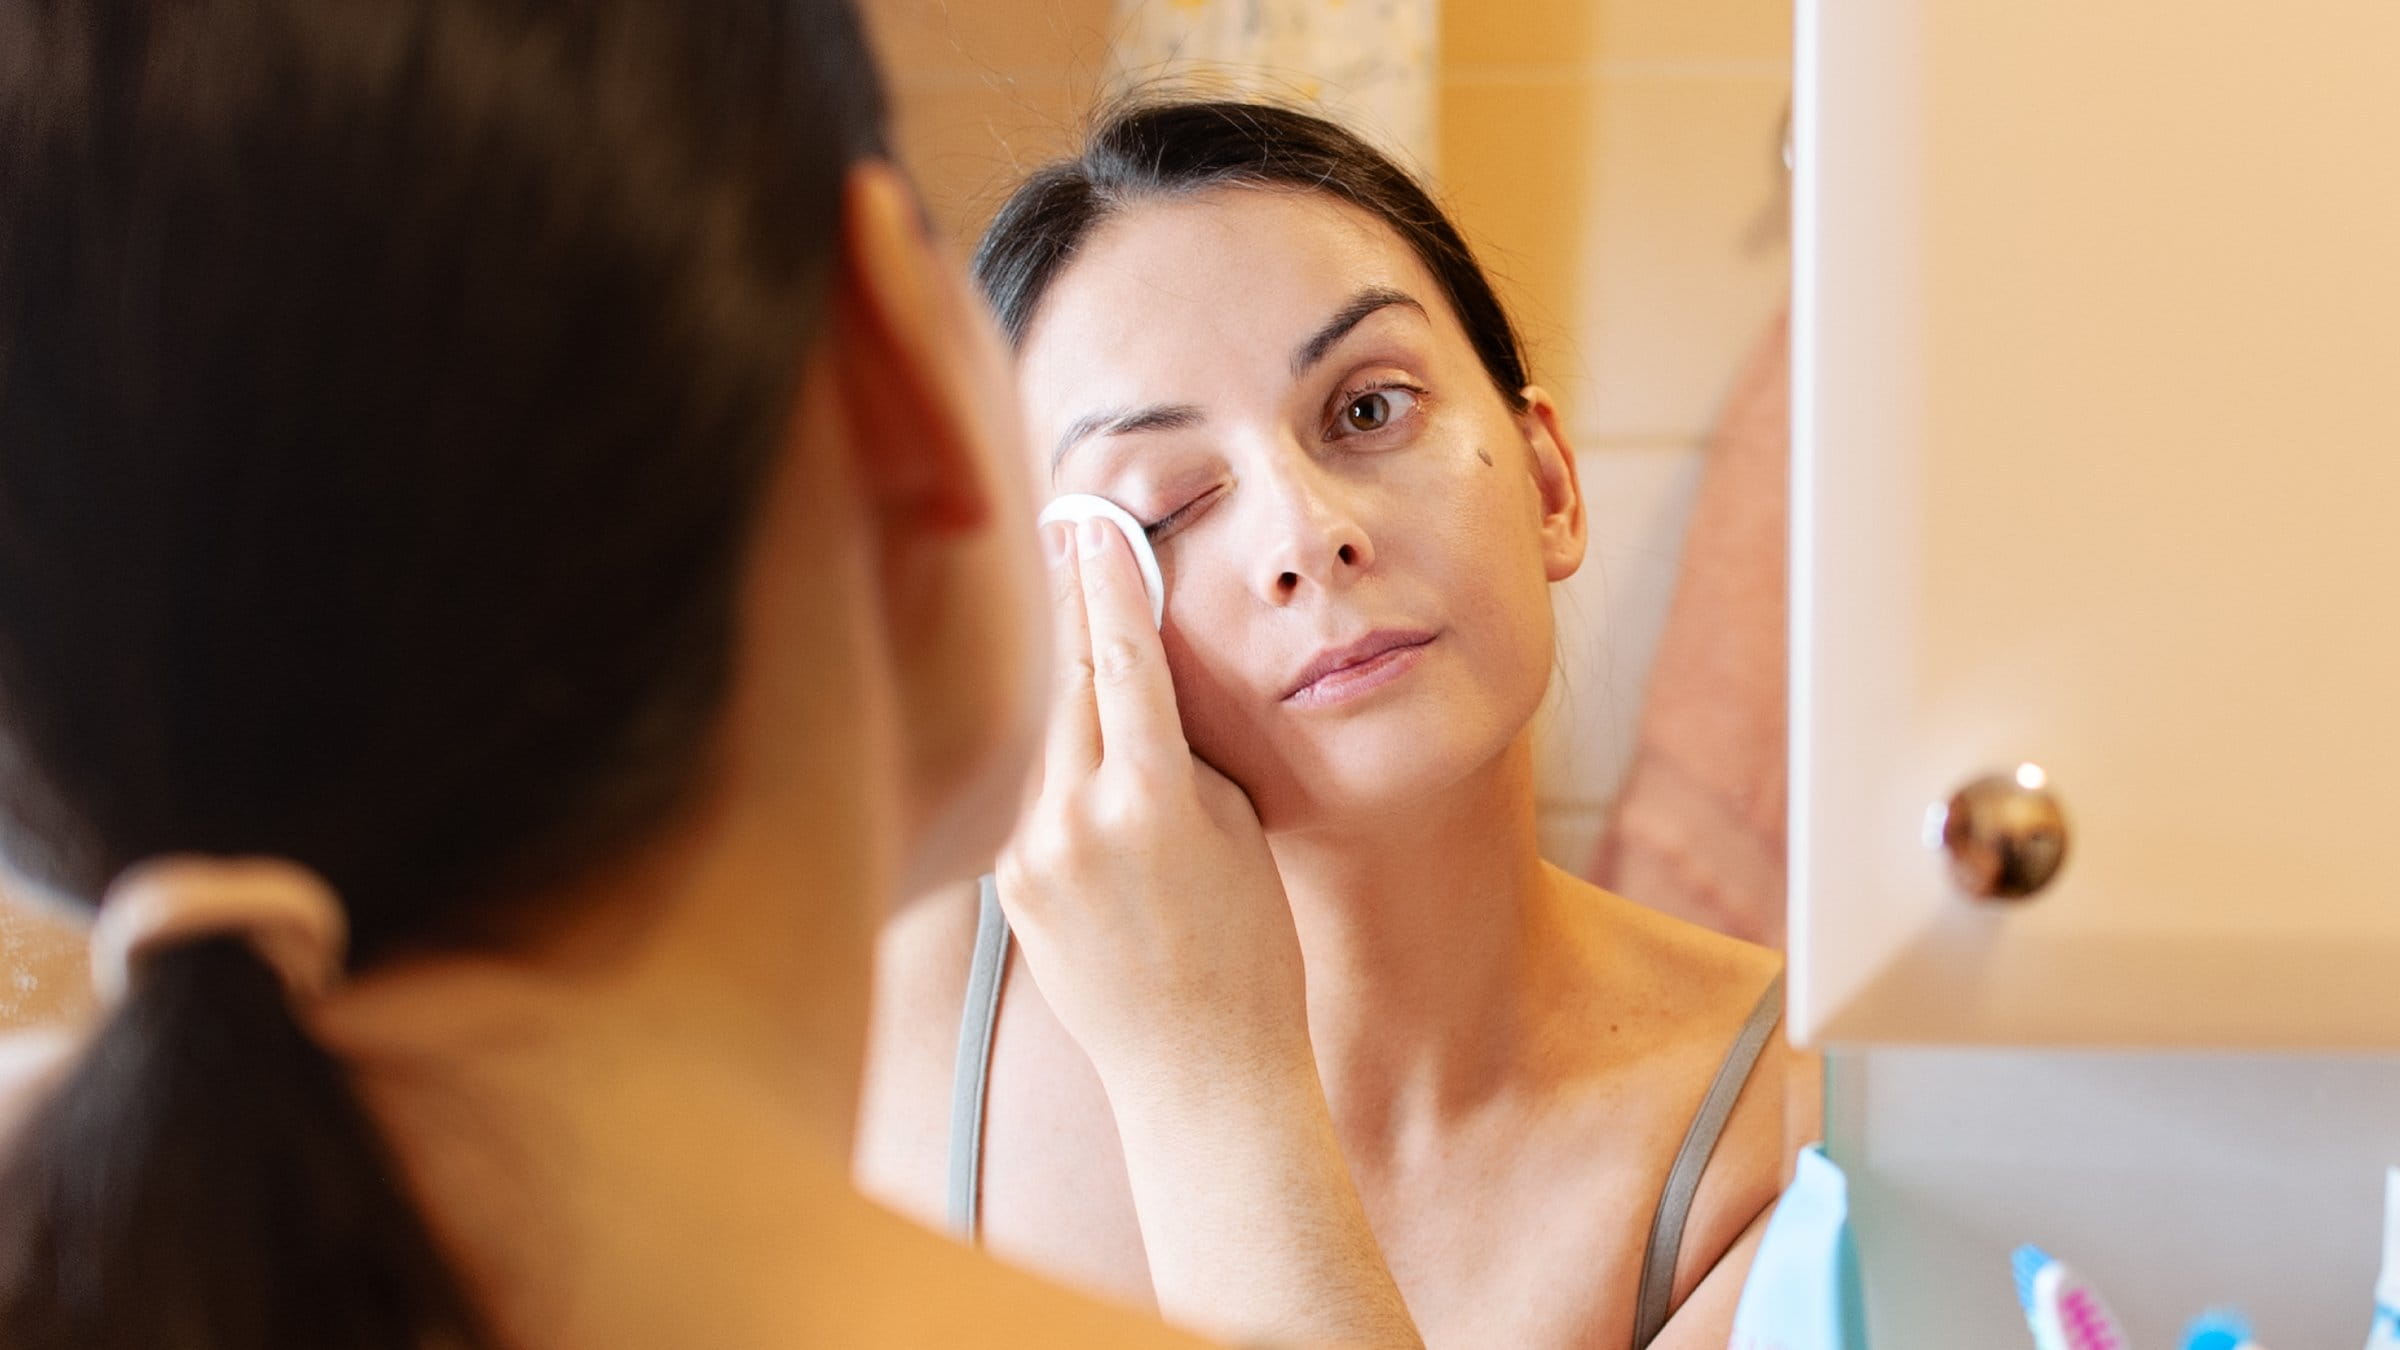 Woman taking off makeup in front of a mirror